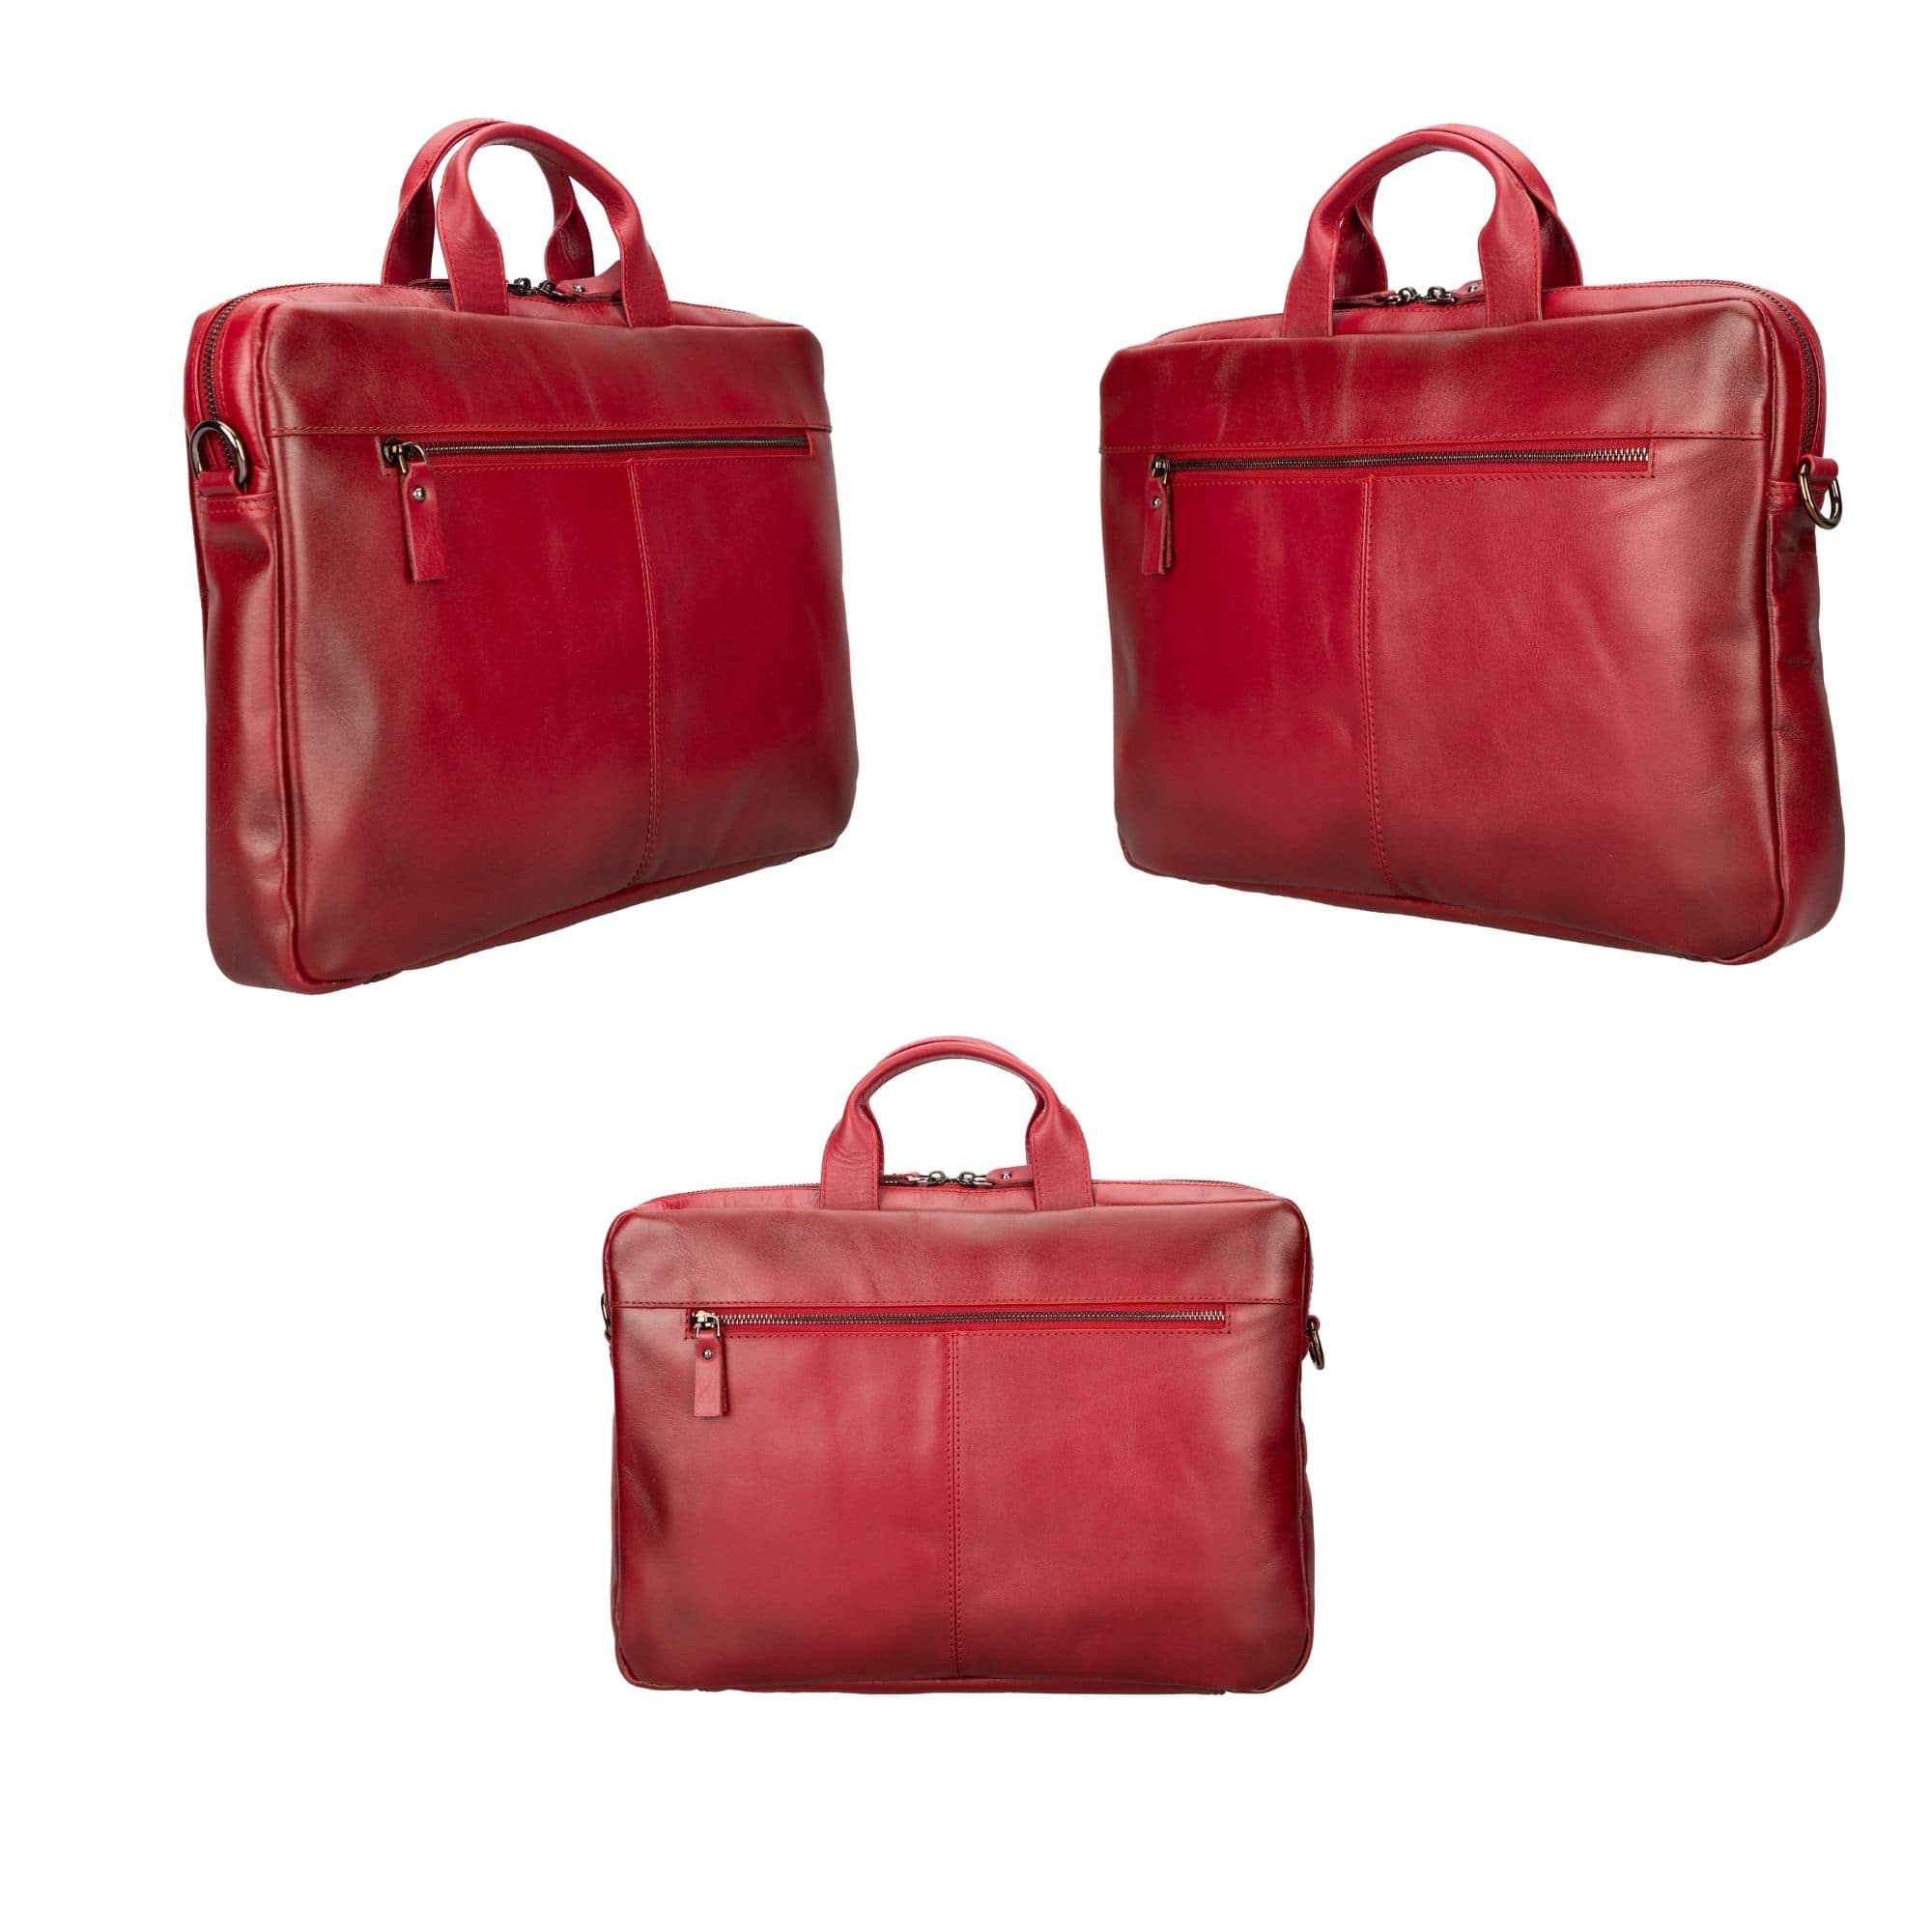 Afton MacBook Leather Sleeve and Bag - 14 Inches - Red - TORONATA